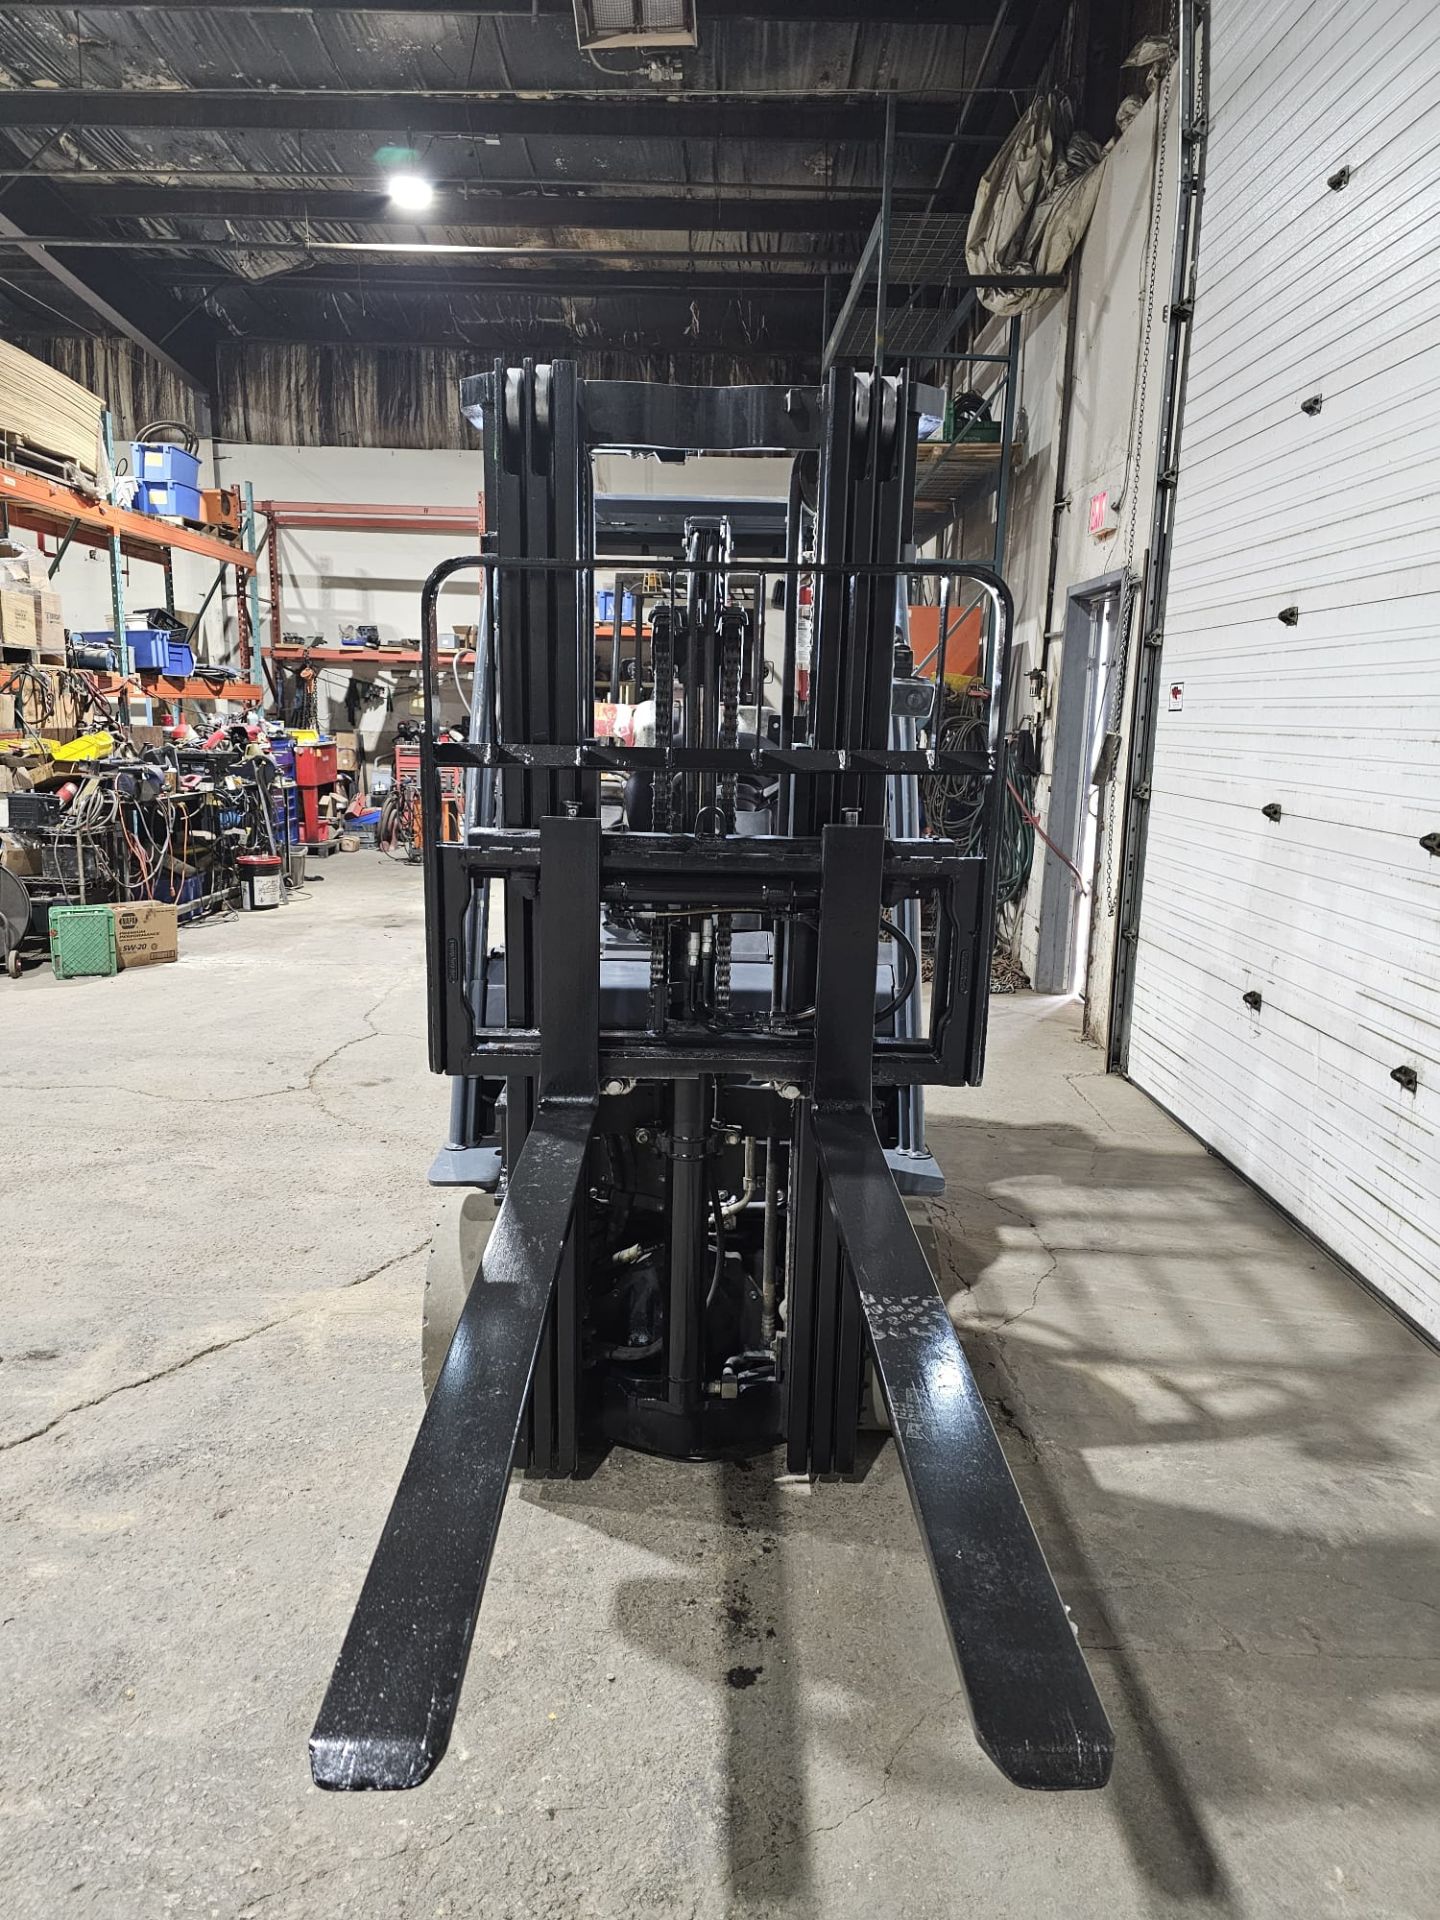 2020 Toyota 5,000lbs Capacity LPG (Propane) Forklift sideshift 3-STAGE MAST 189" load height with - Image 6 of 6